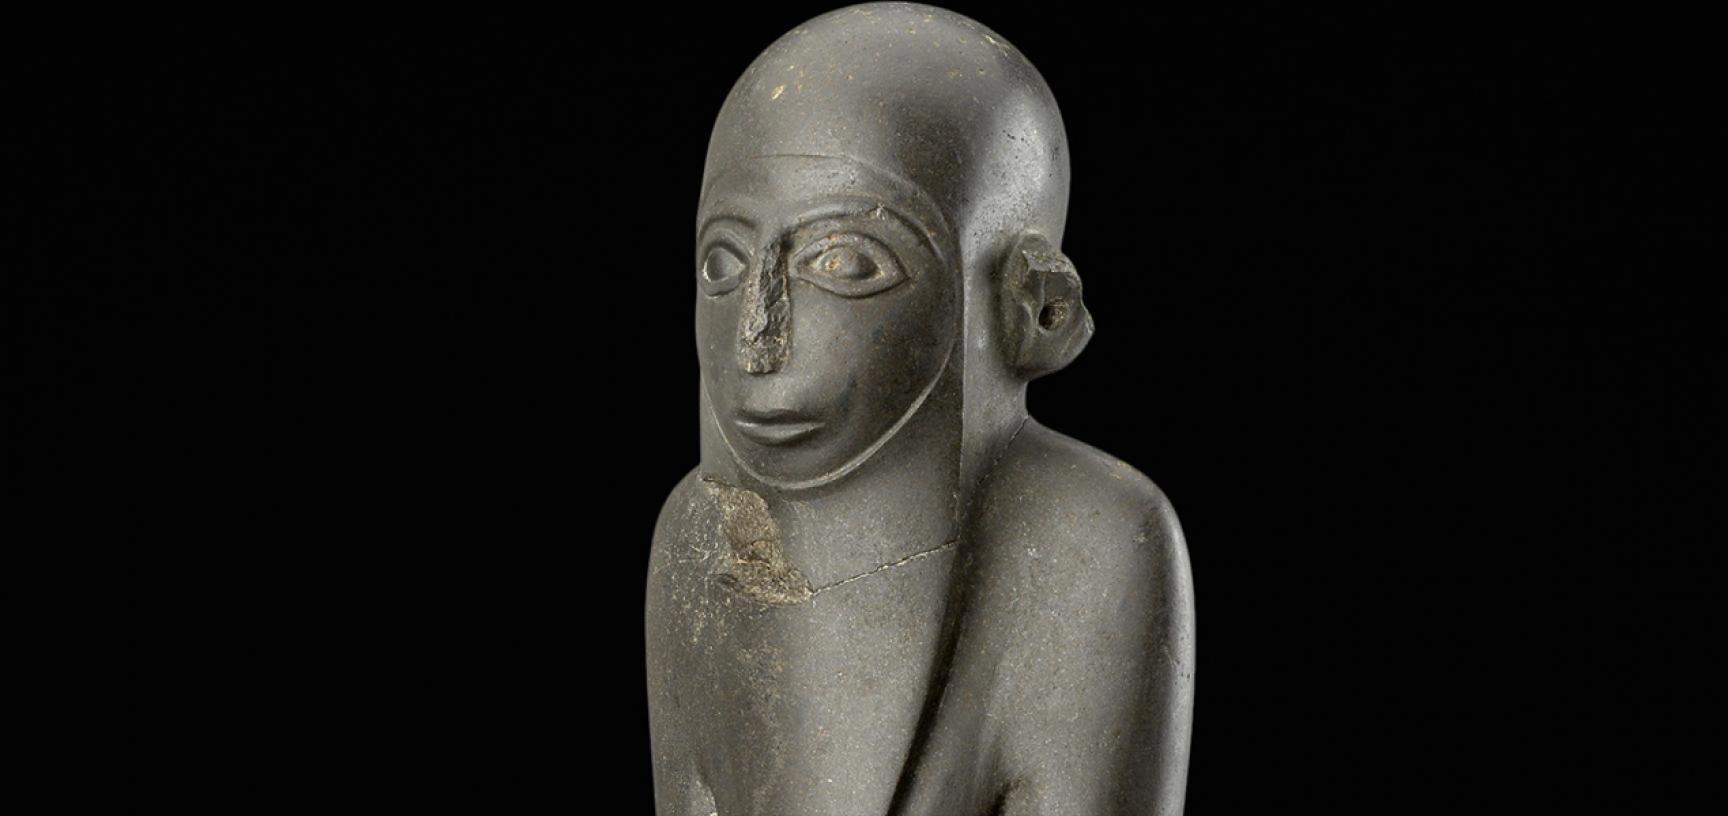 EGYPT AND ITS ORIGINS at the Ashmolean